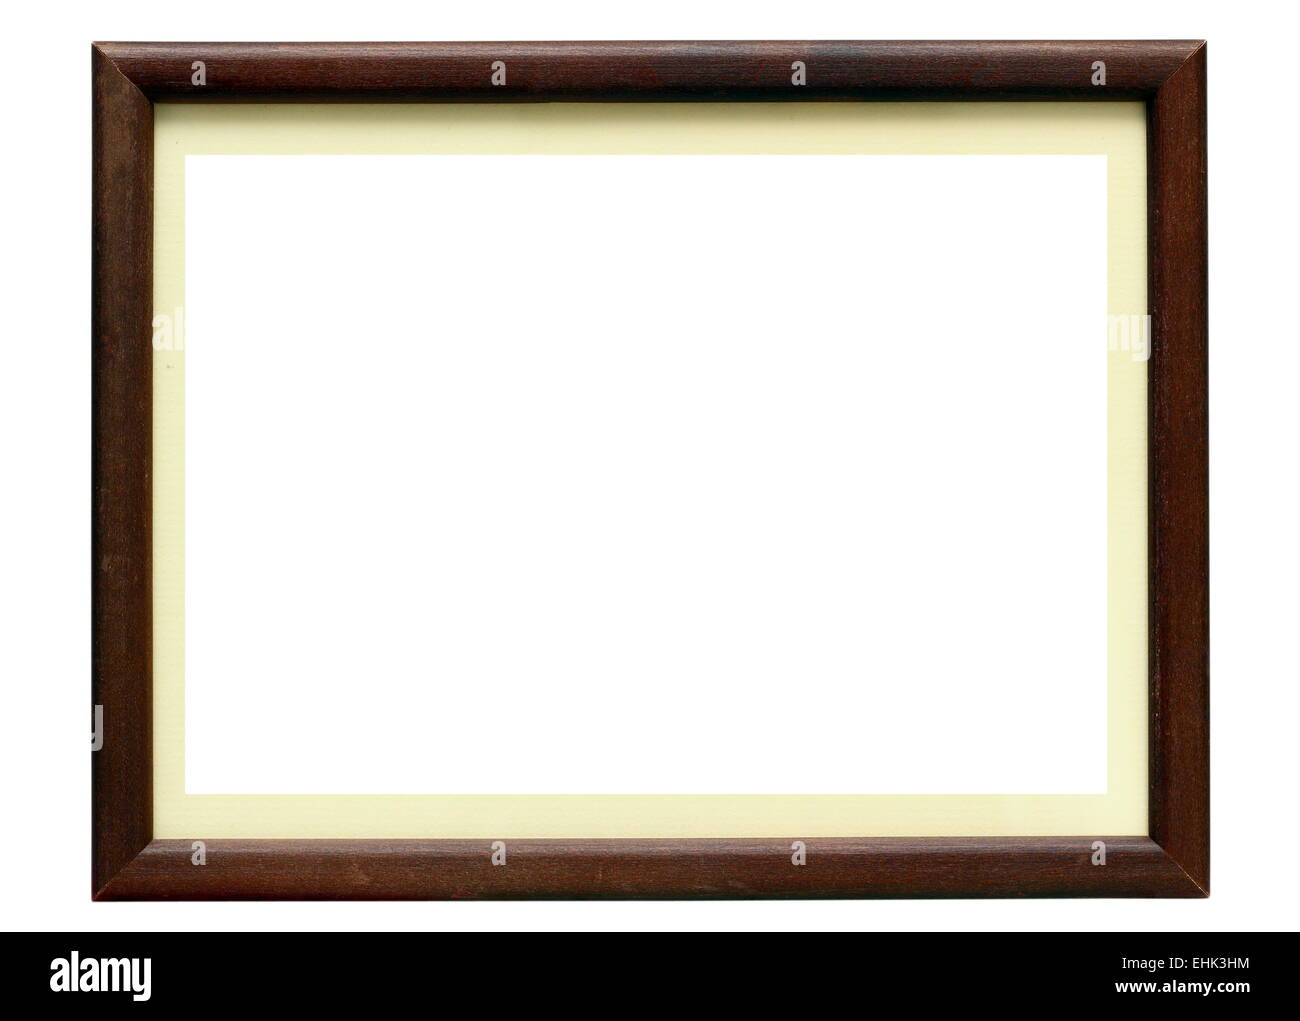 wooden photo frame isolated over white background Stock Photo